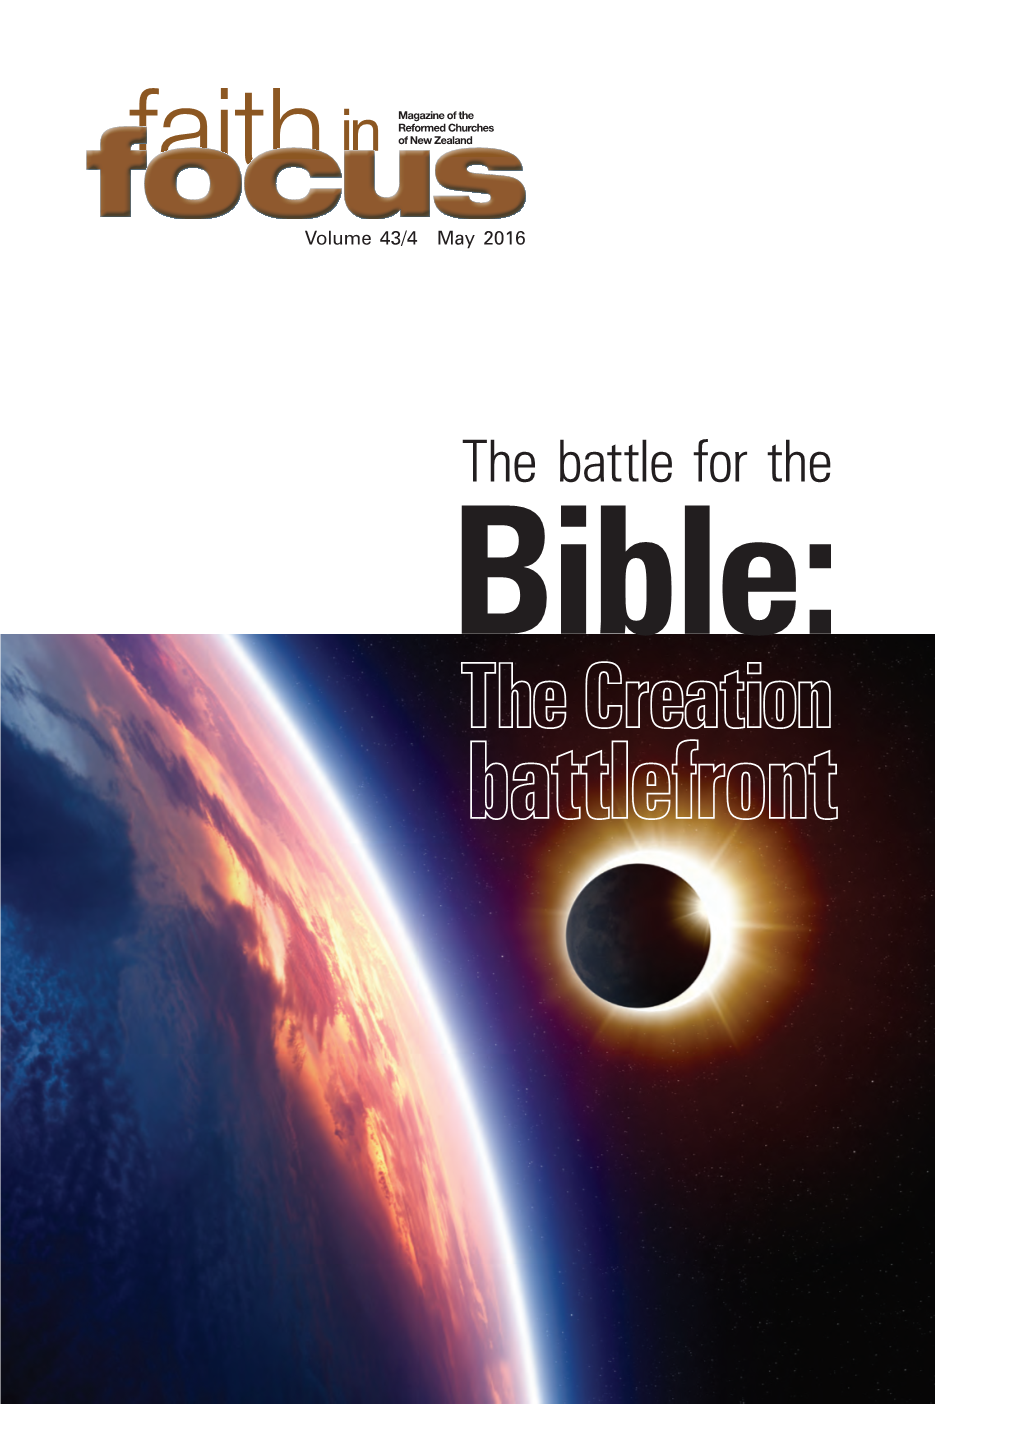 The Battle for the Bible